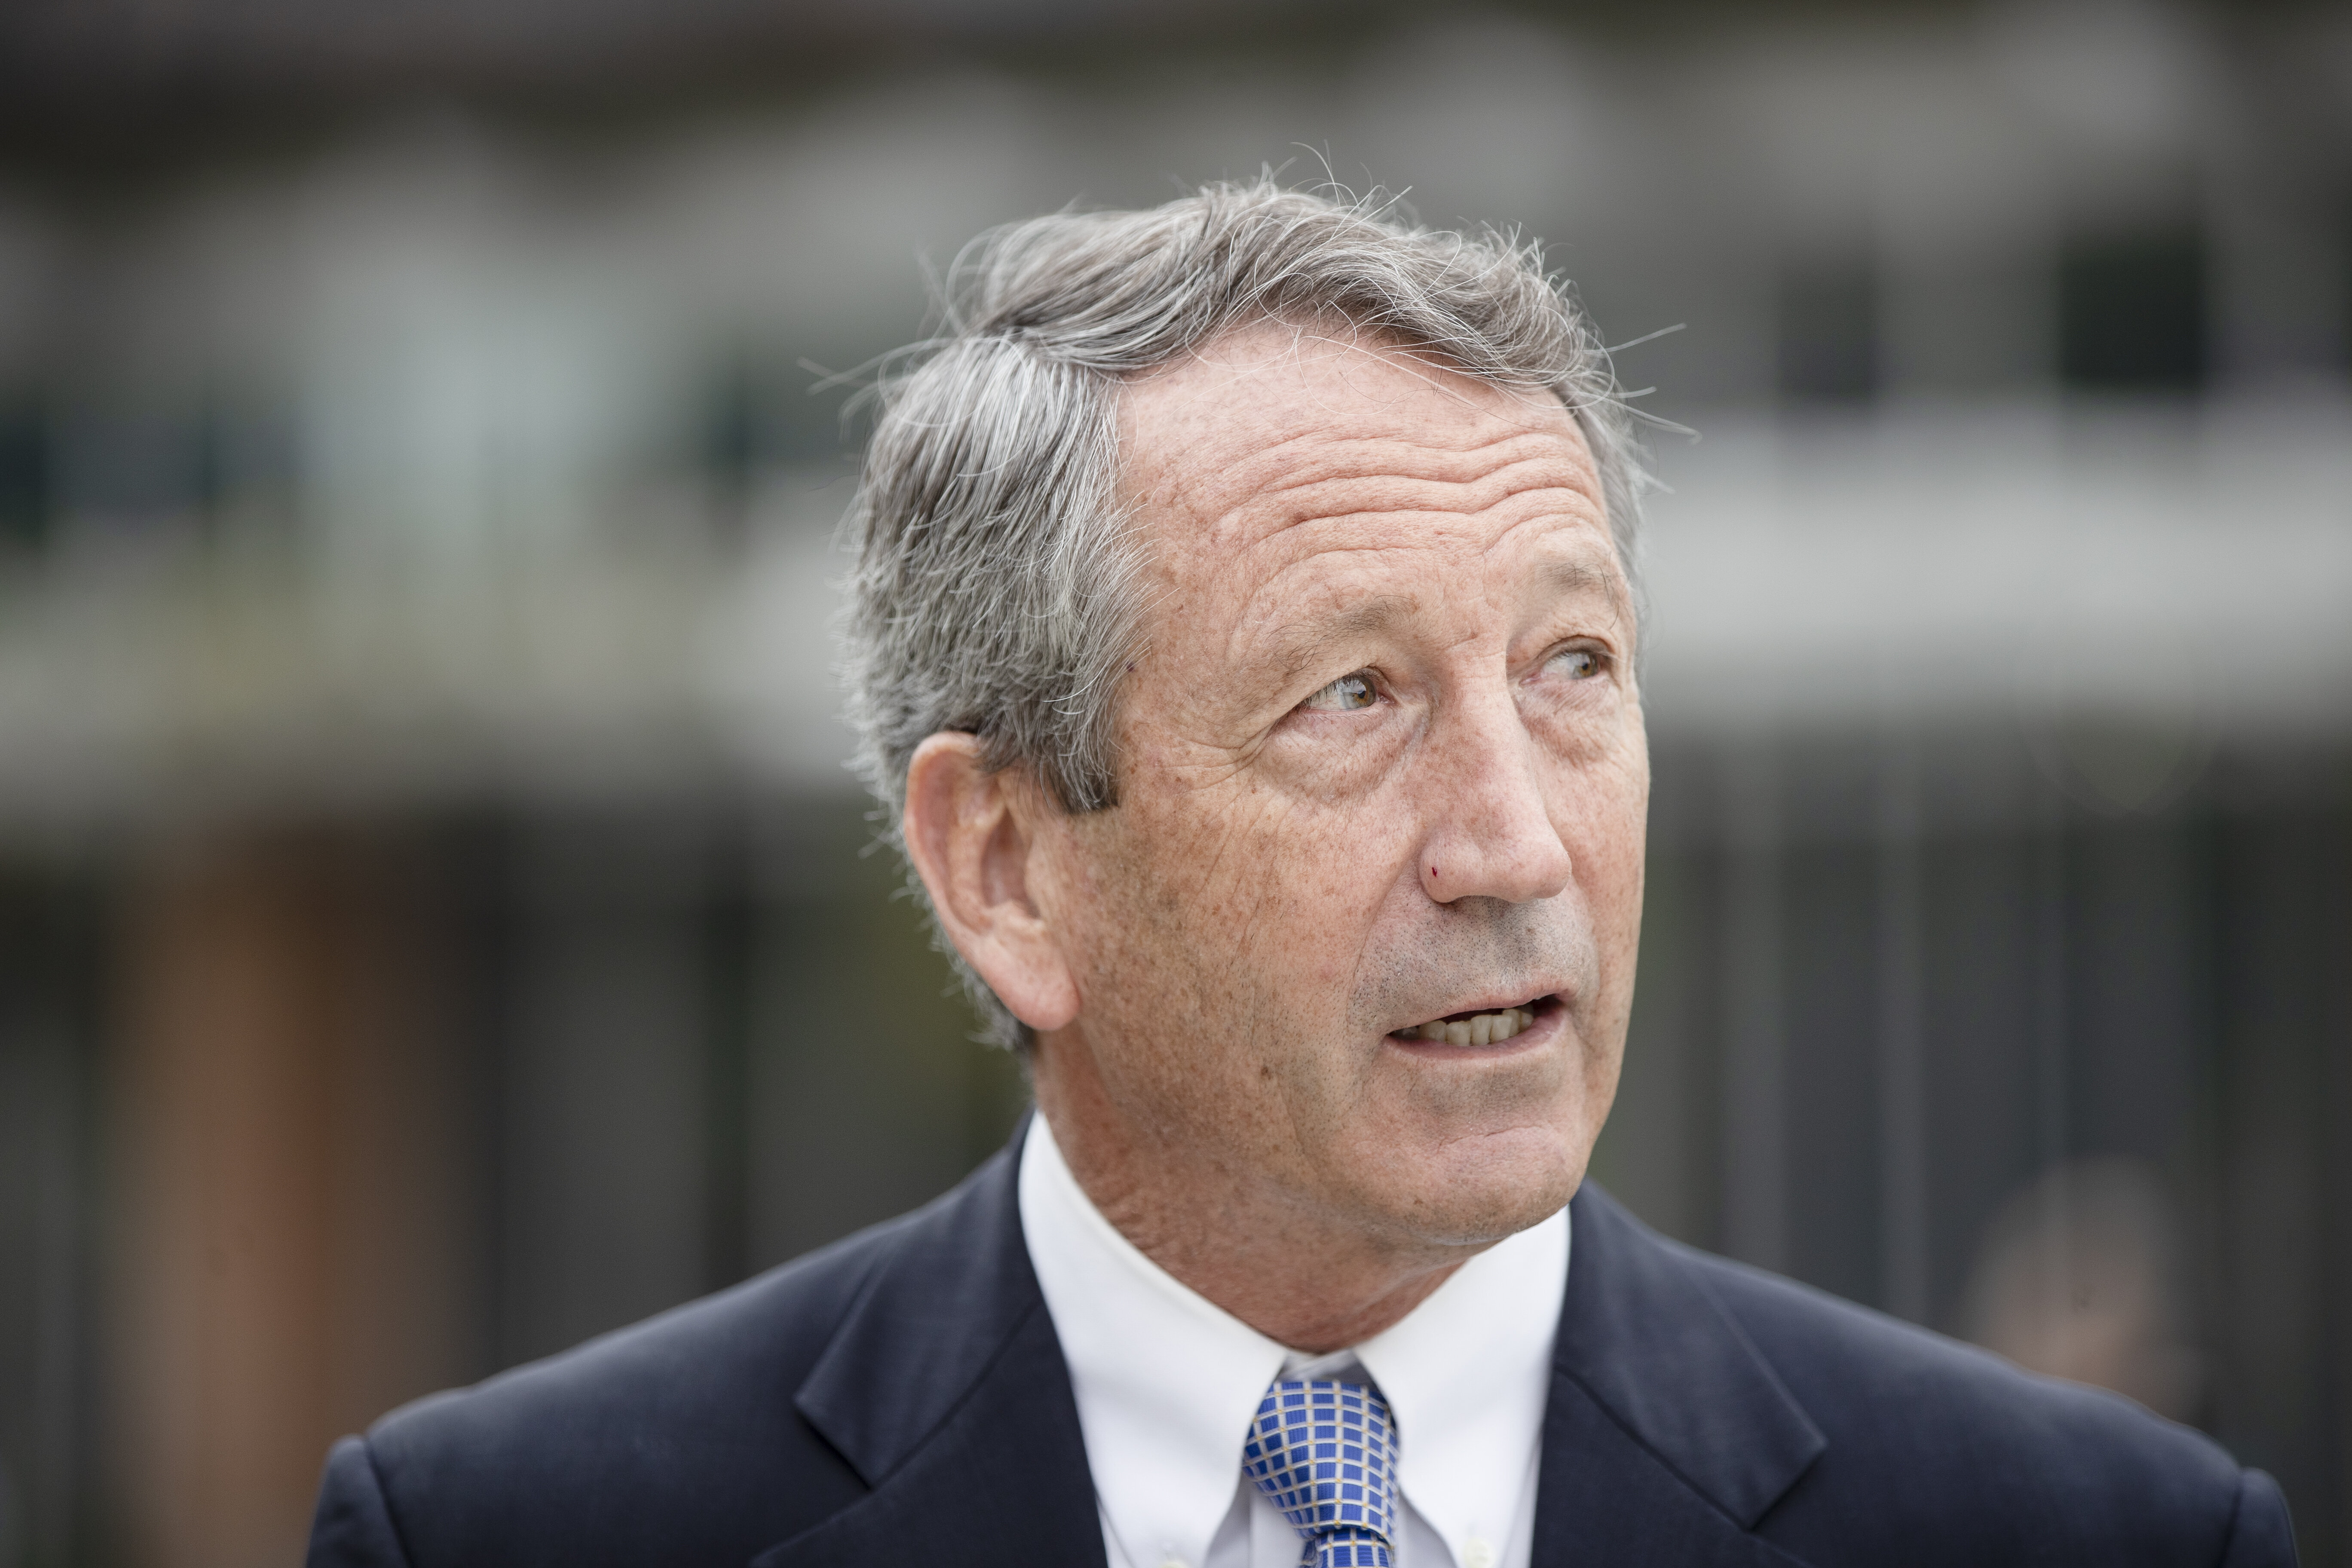 Republican Mark Sanford Drops Out Of 2020 Presidential Race